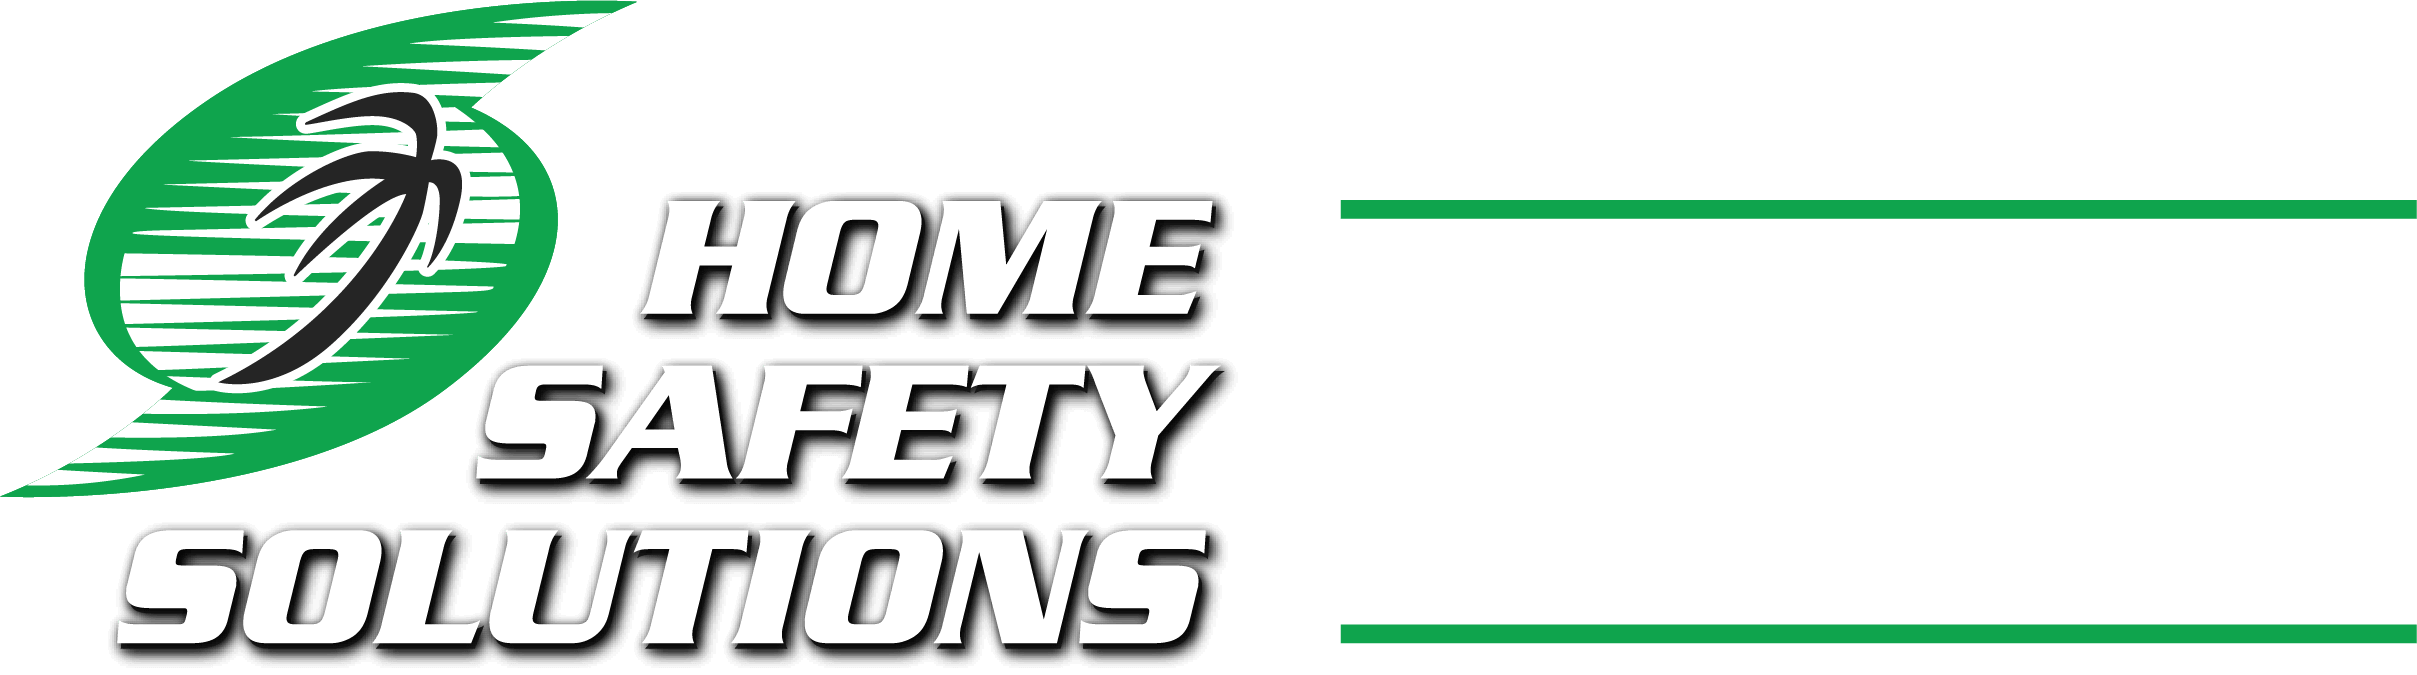 Home Safety Solutions